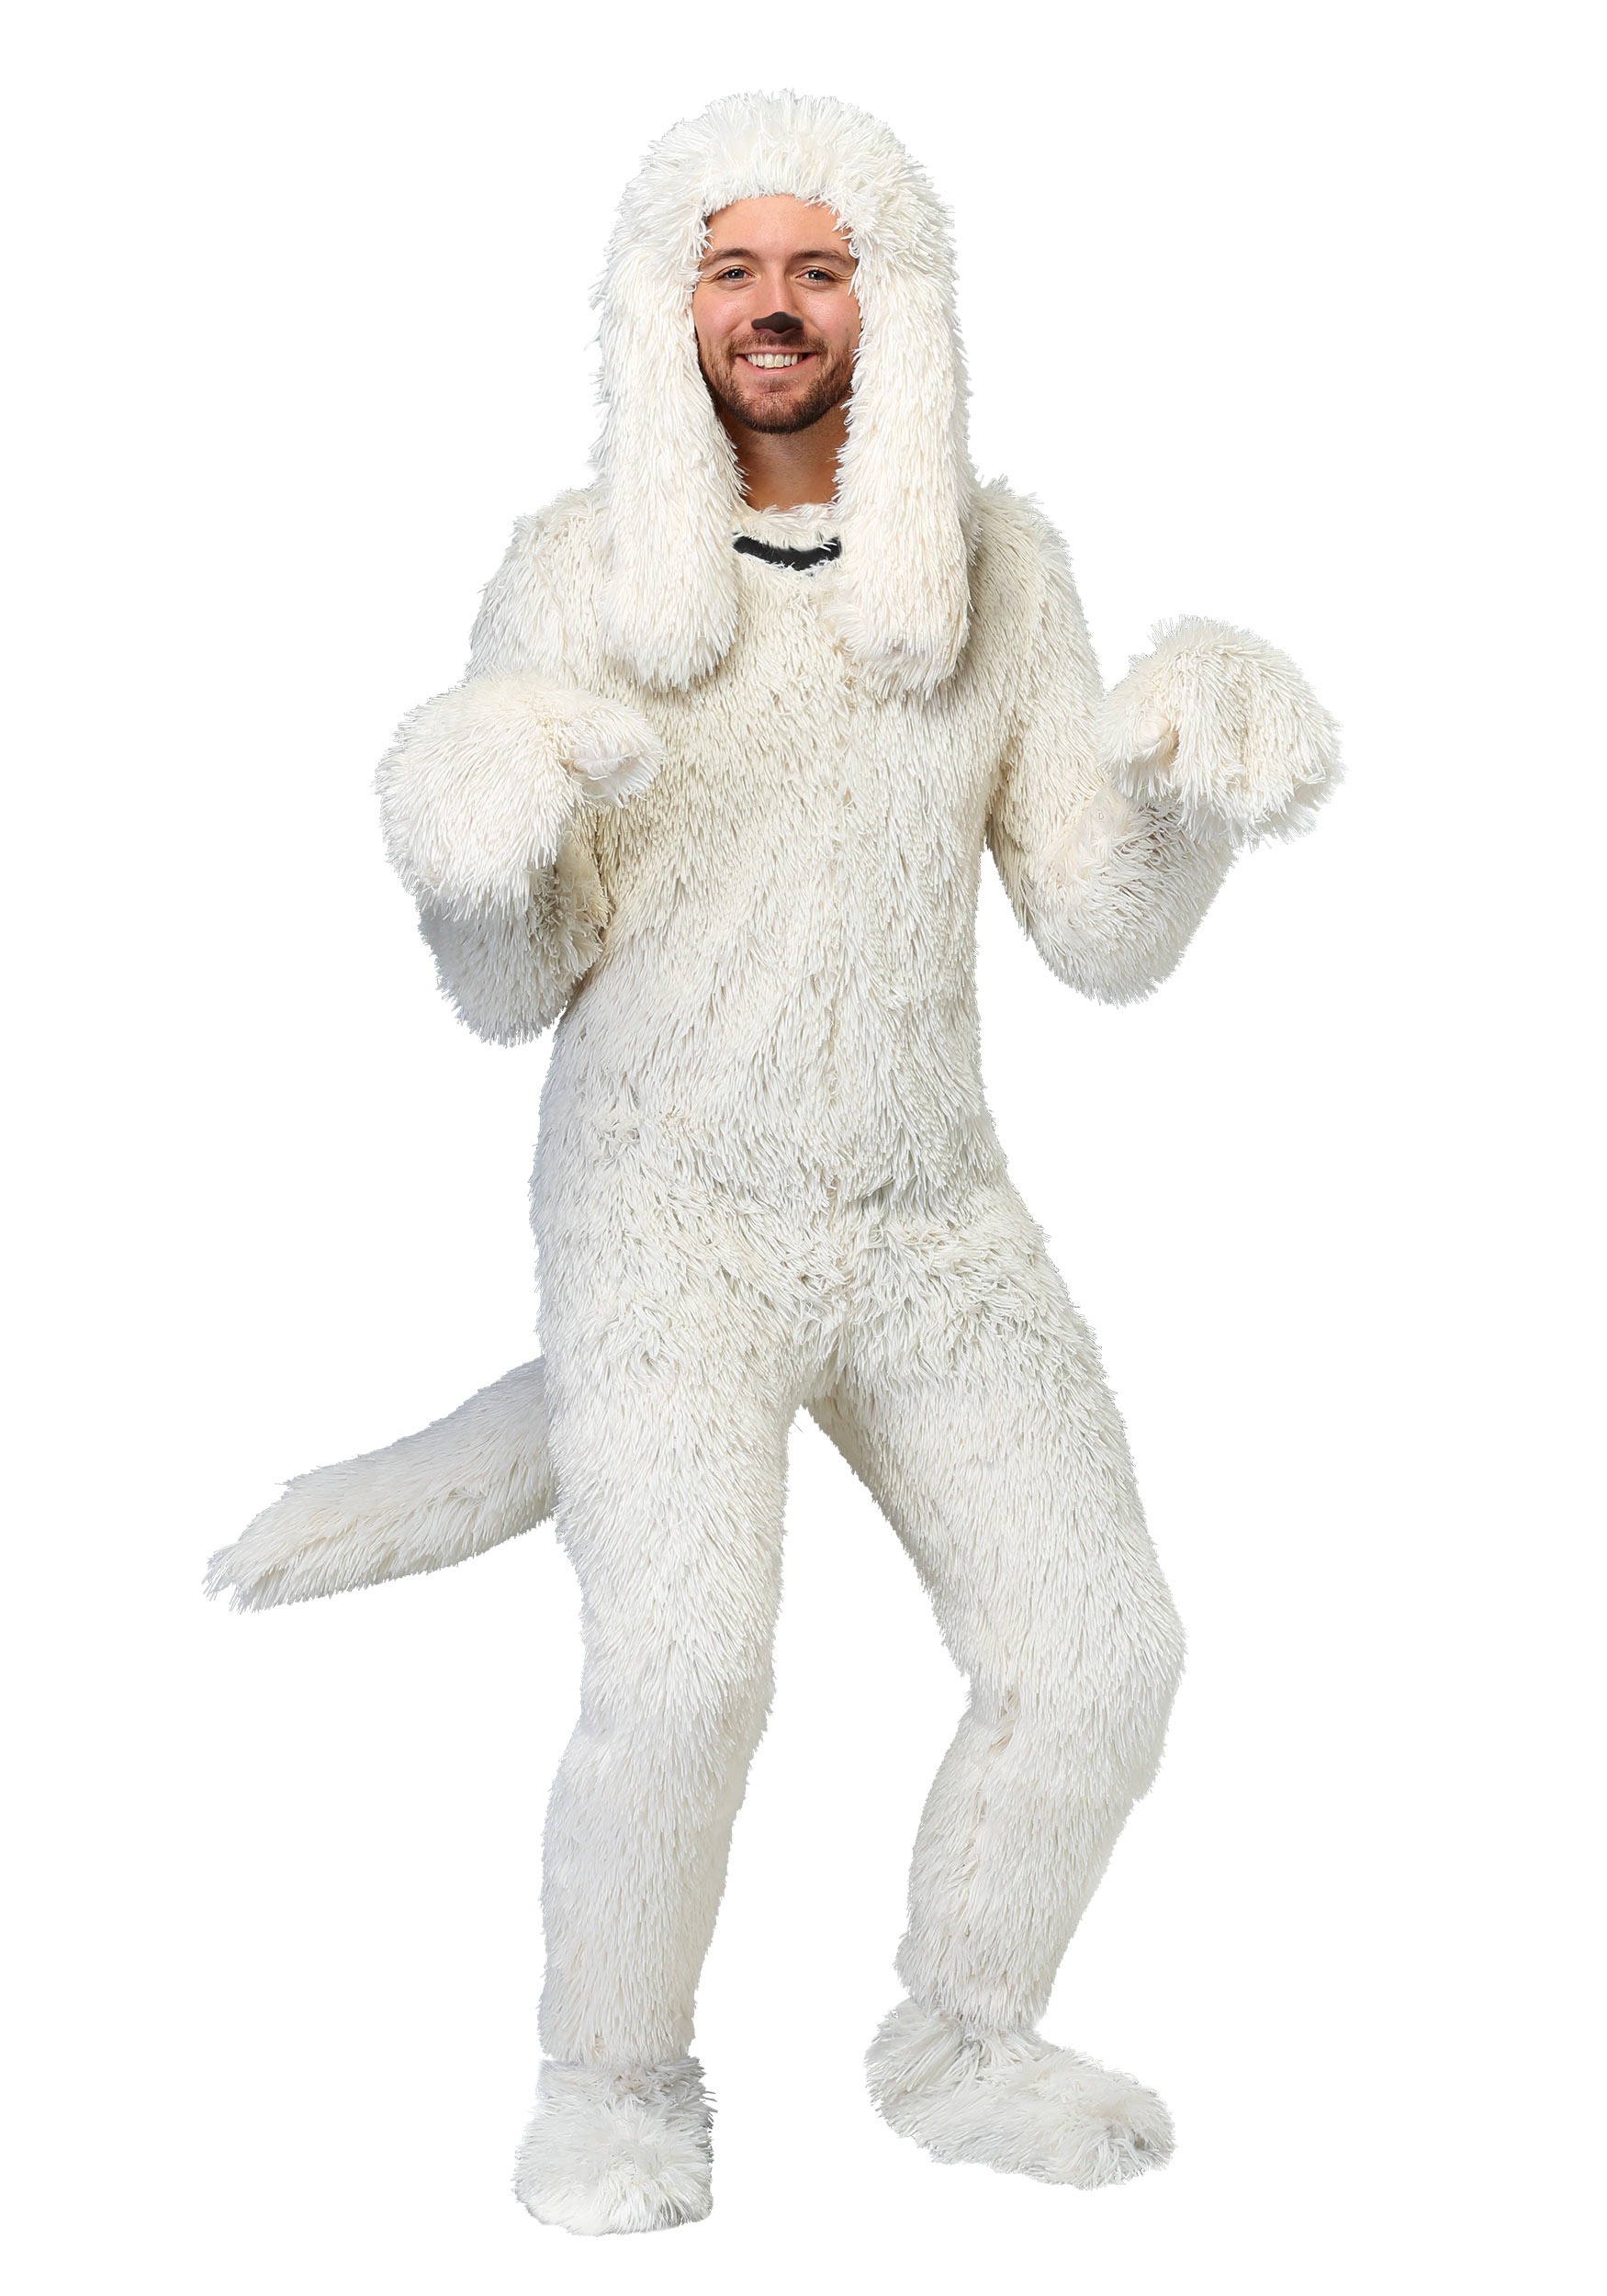 Photos - Fancy Dress FUN Costumes Shaggy Sheep Dog Costume for Adults White